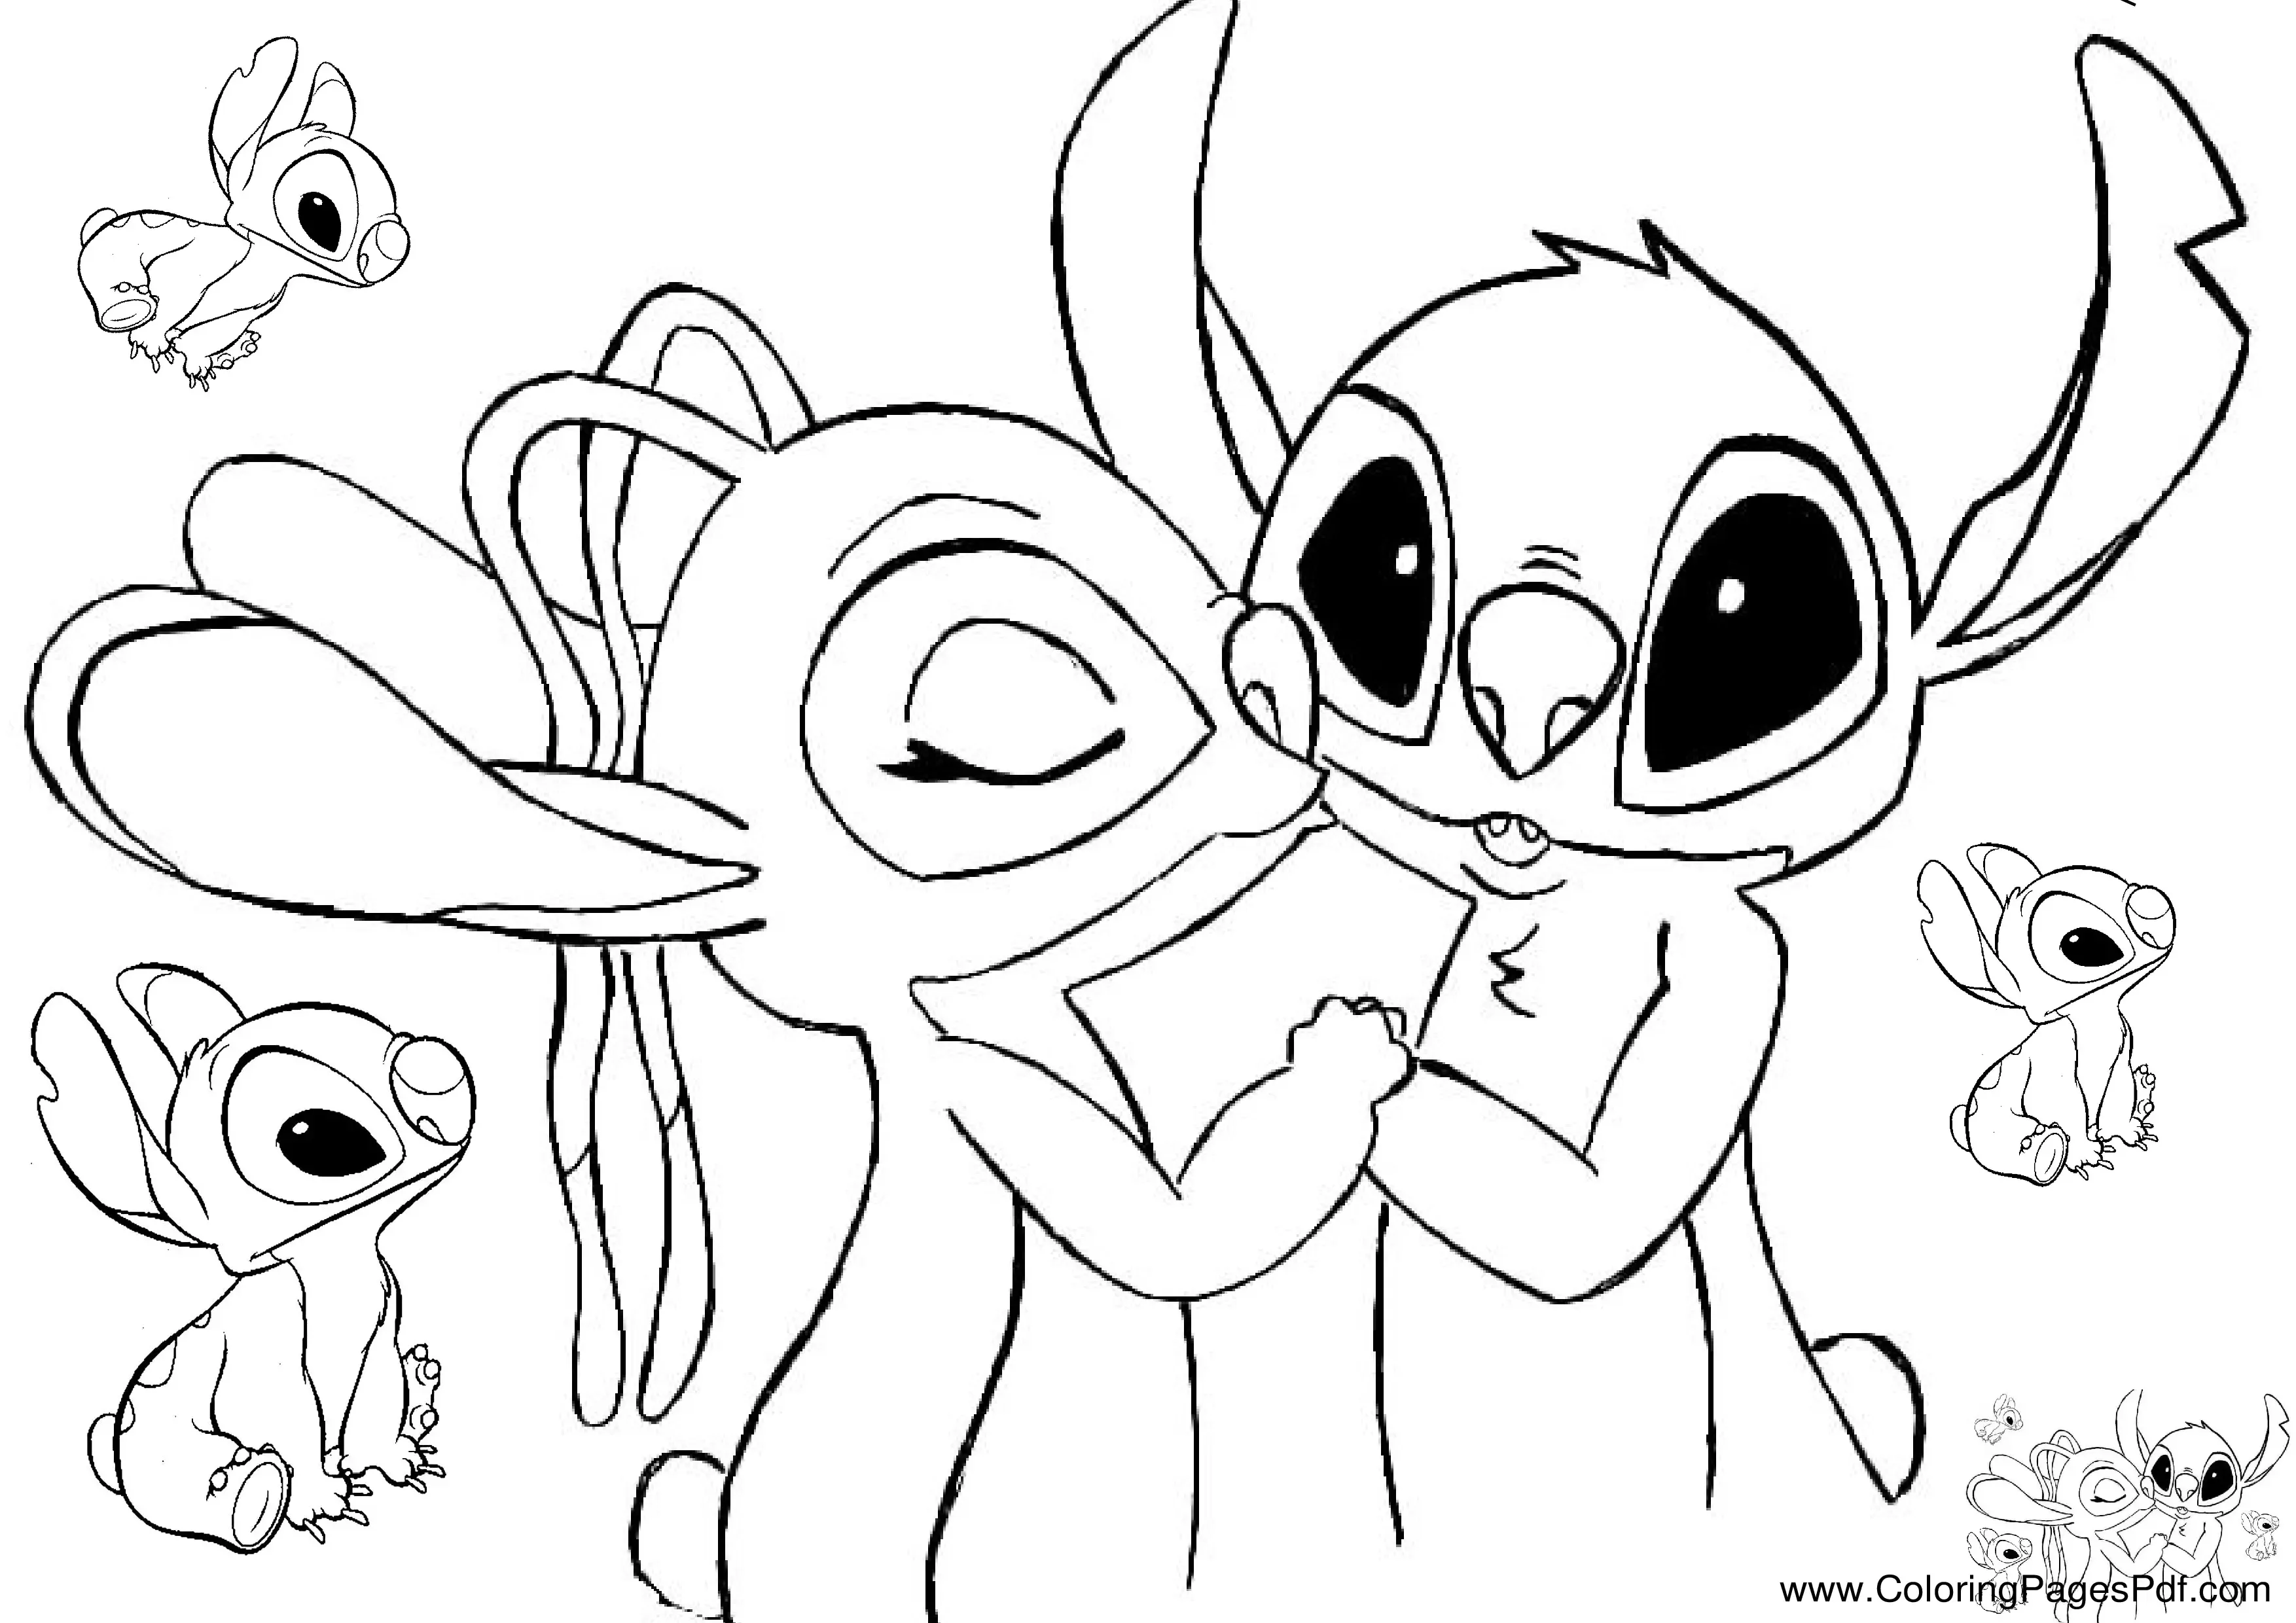 Stitch coloring pages cute